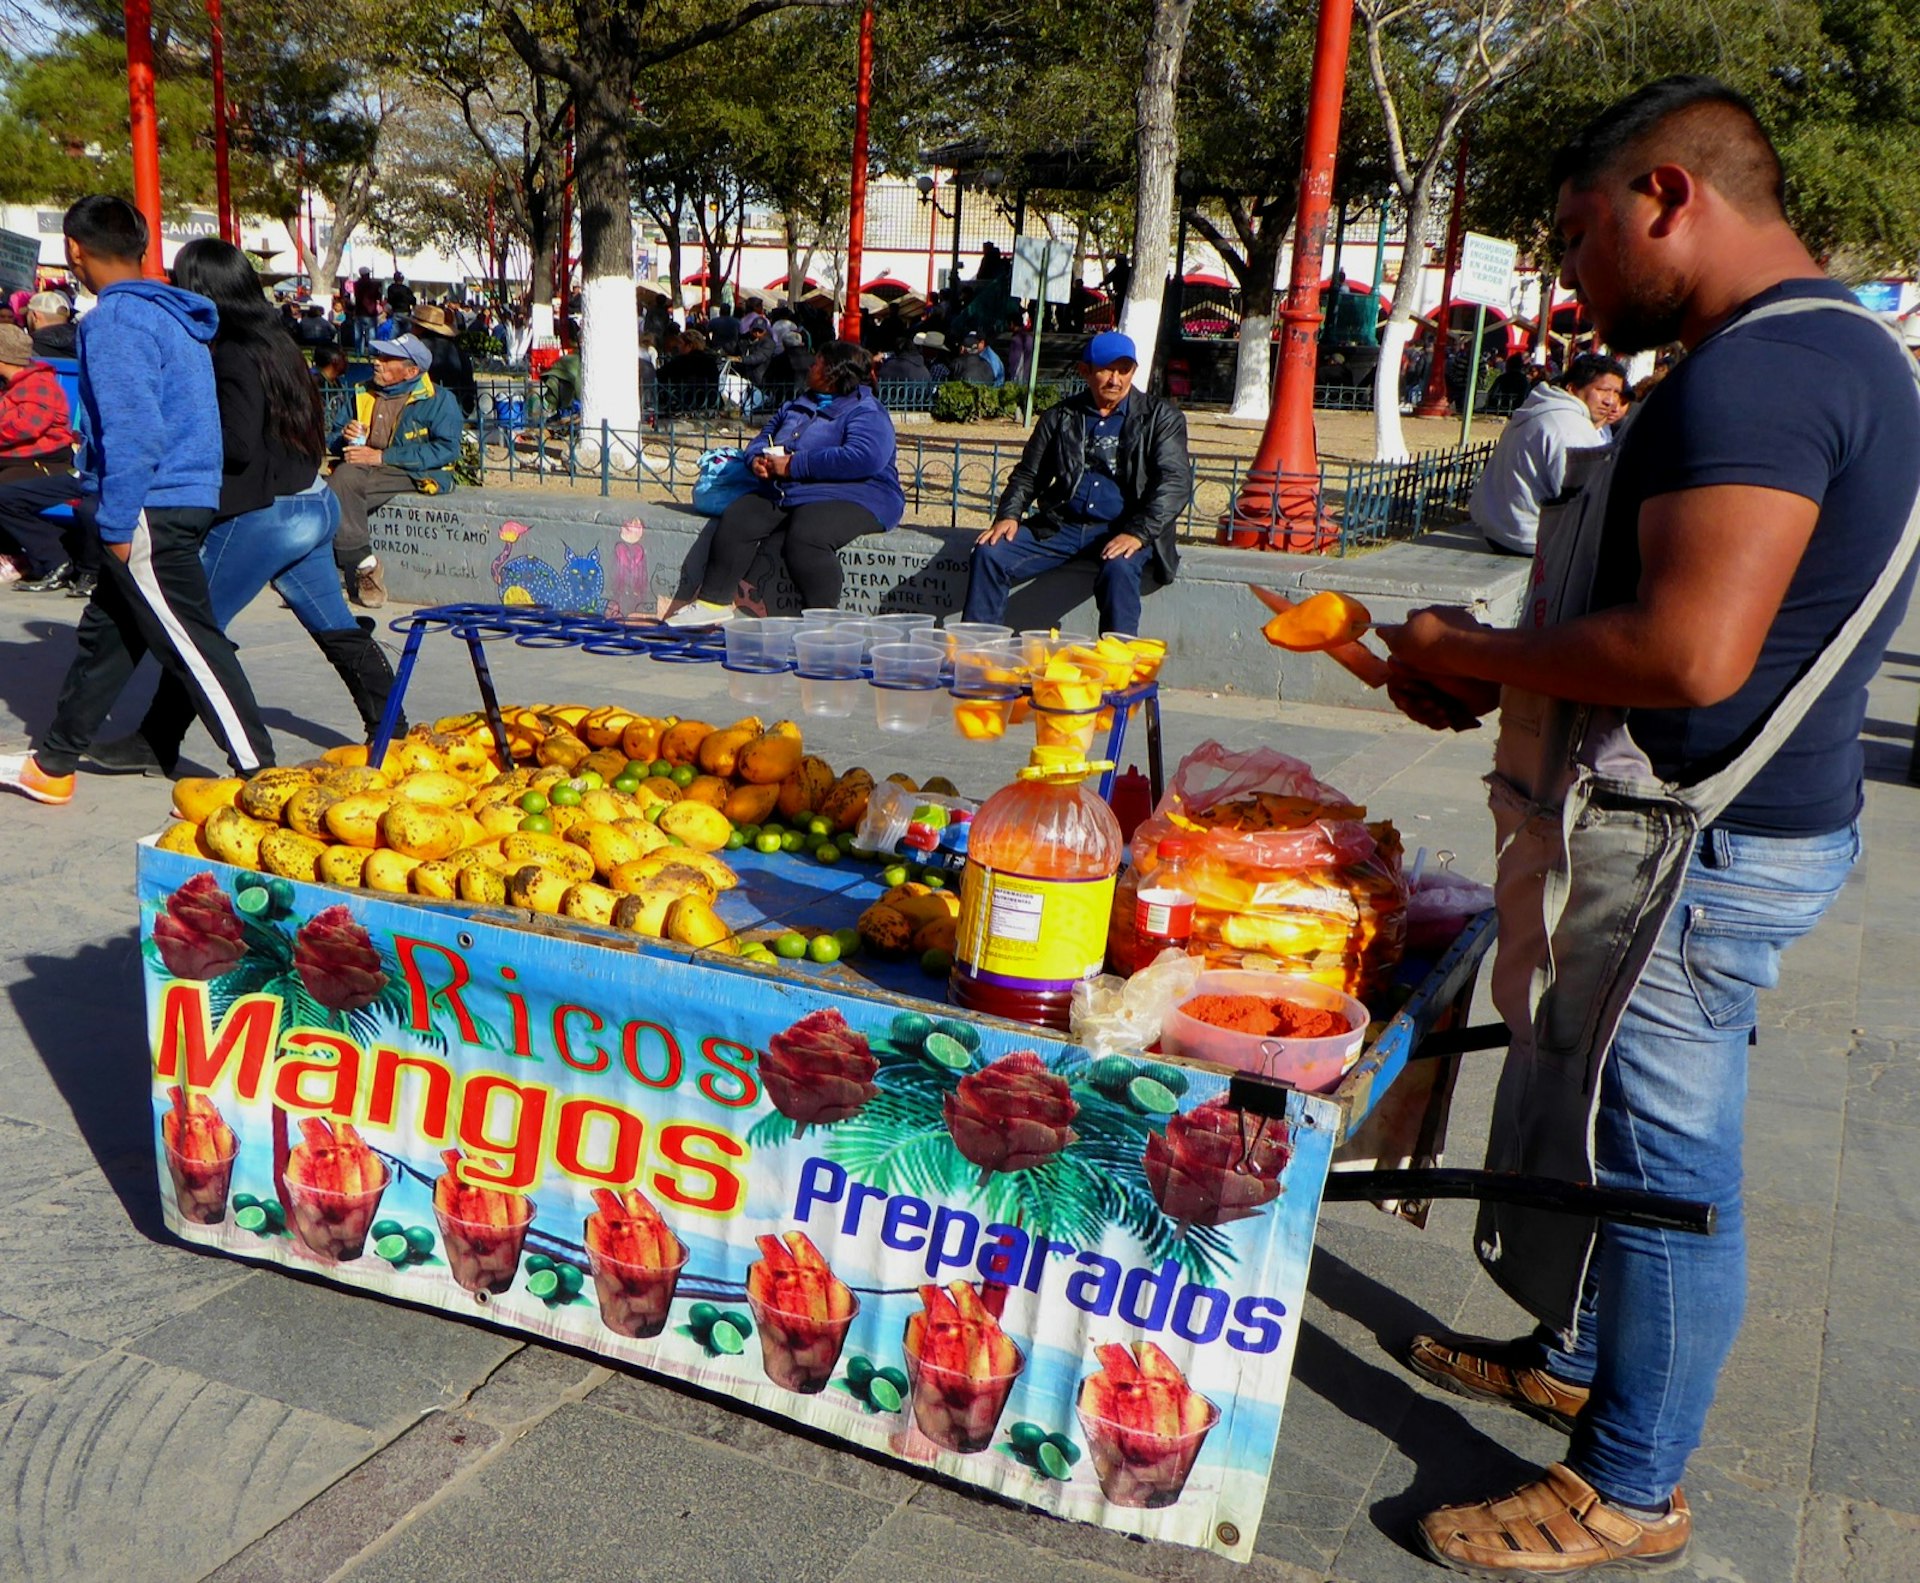 A man cells mangoes from a small stand as people sit around on park benches